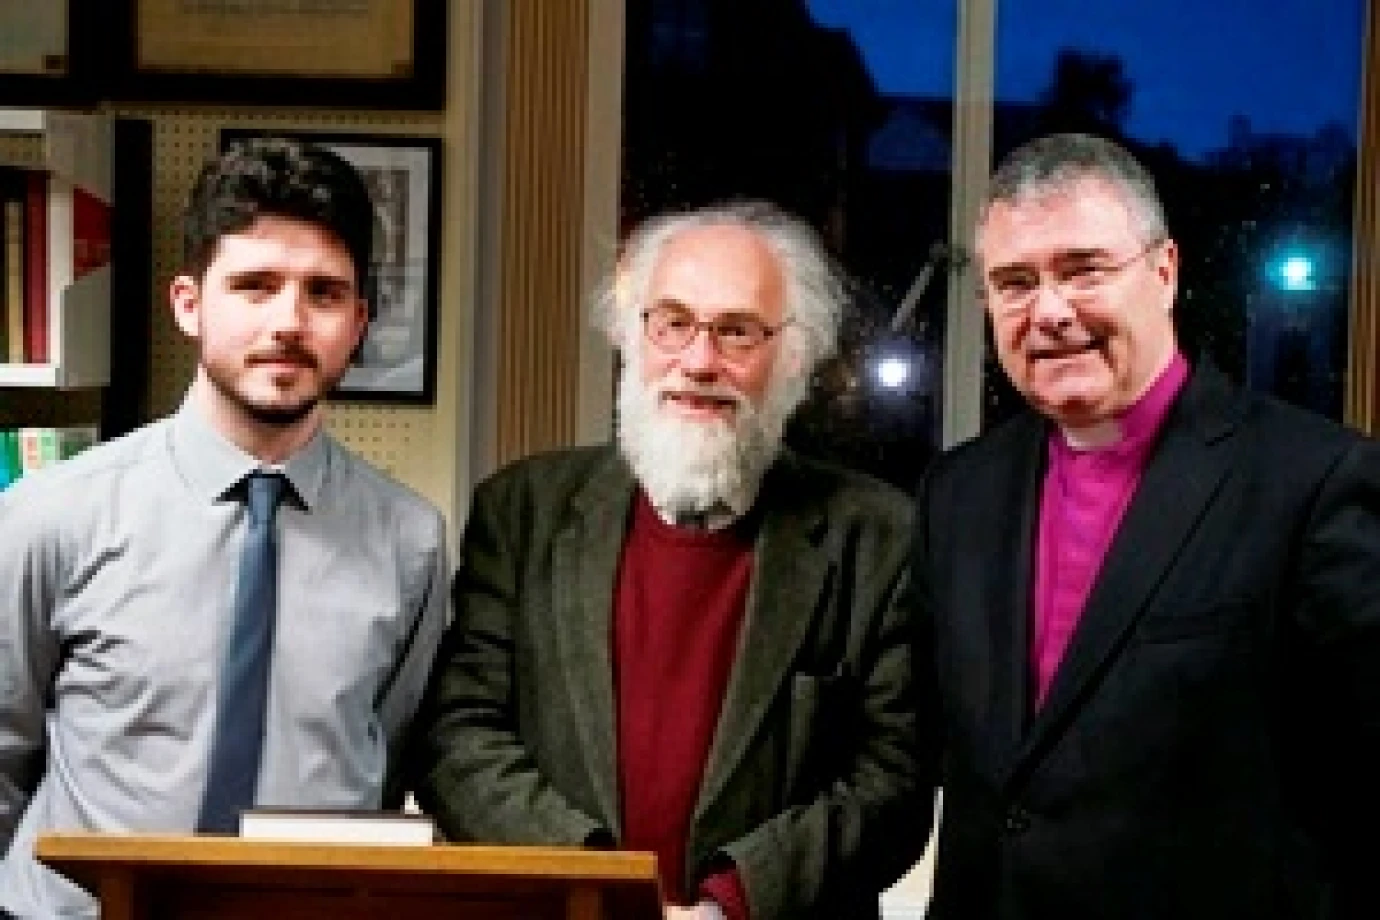 Sermon book launched in St Anne’s